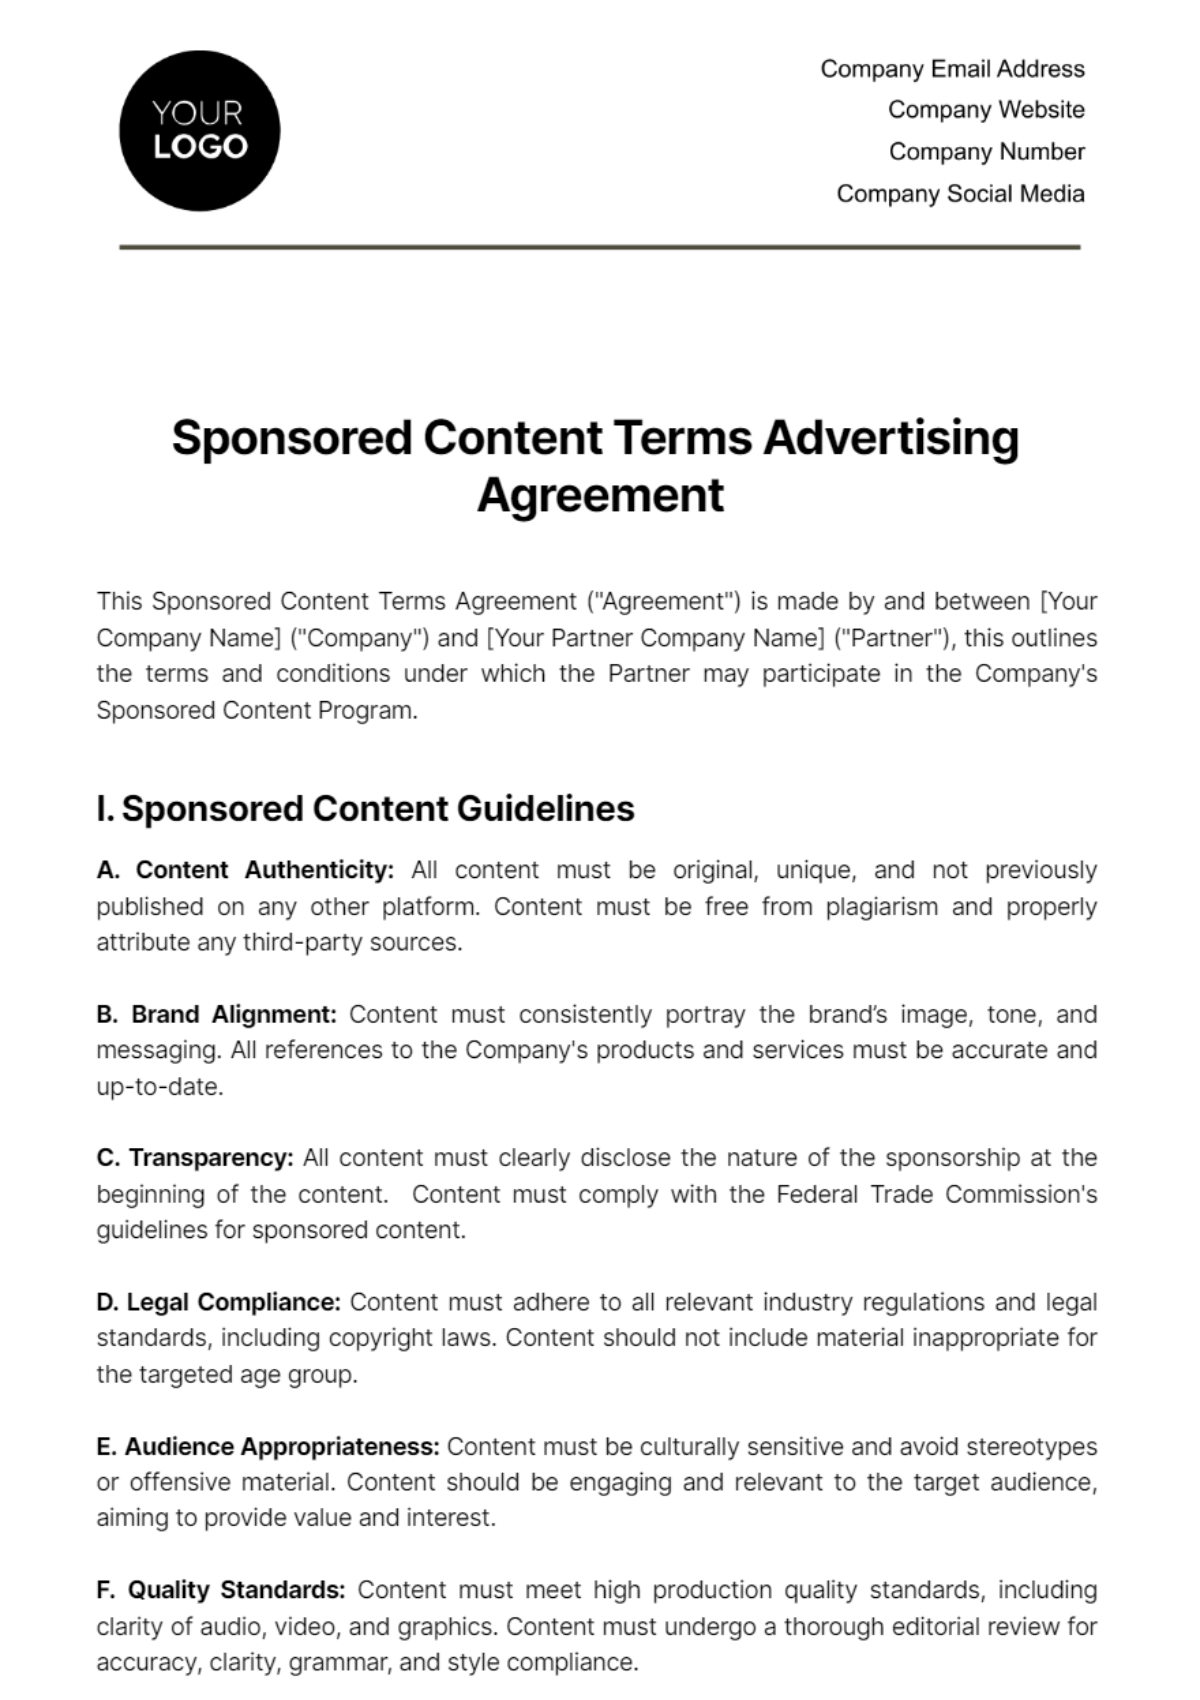 Free Sponsored Content Terms Advertising Agreement Template